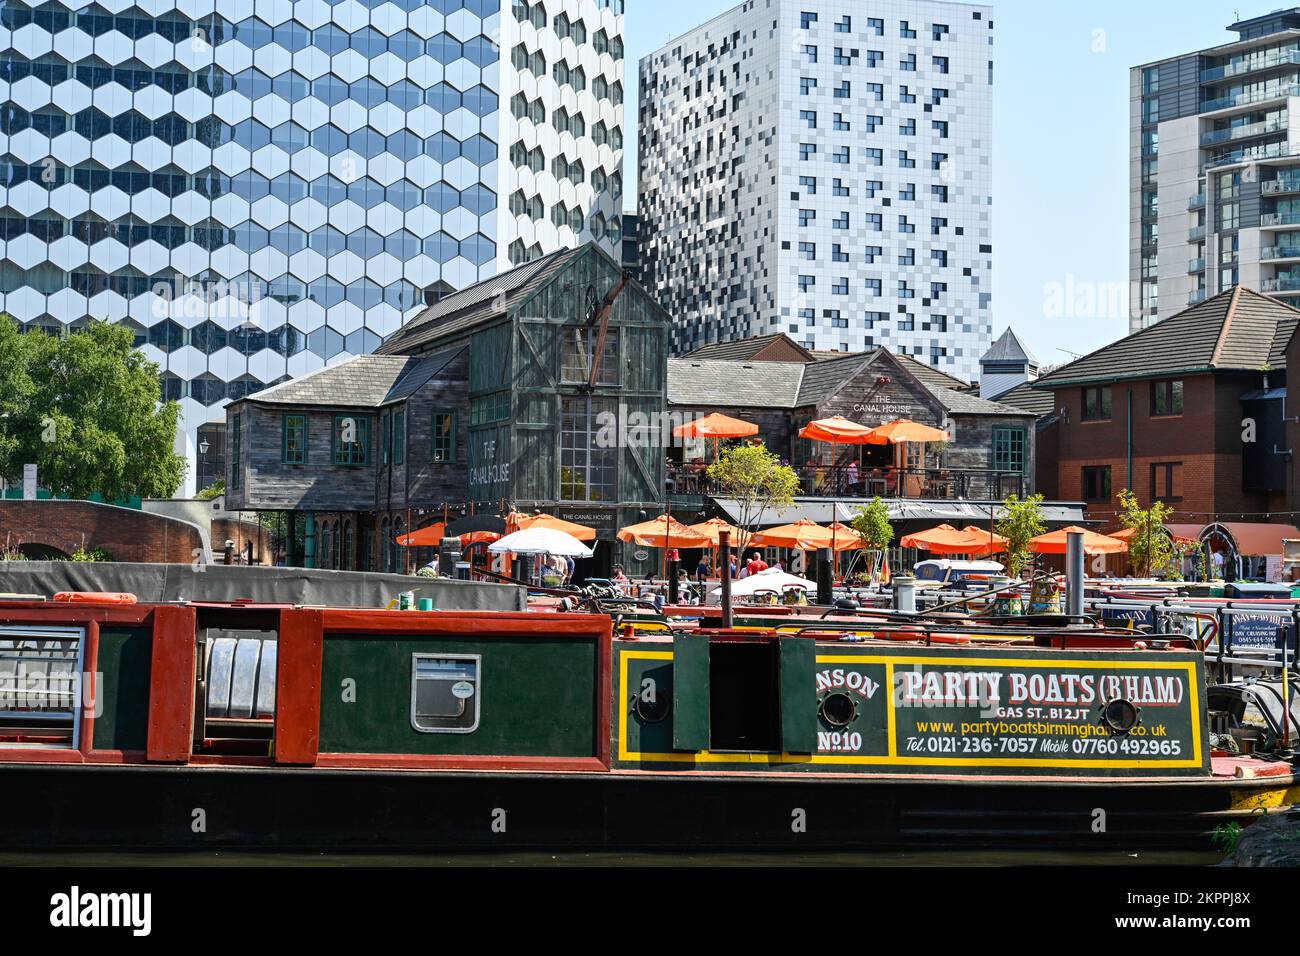 Gas Street Basin in the centre of Birmingham UK and part of the cities waterways Stock Photo